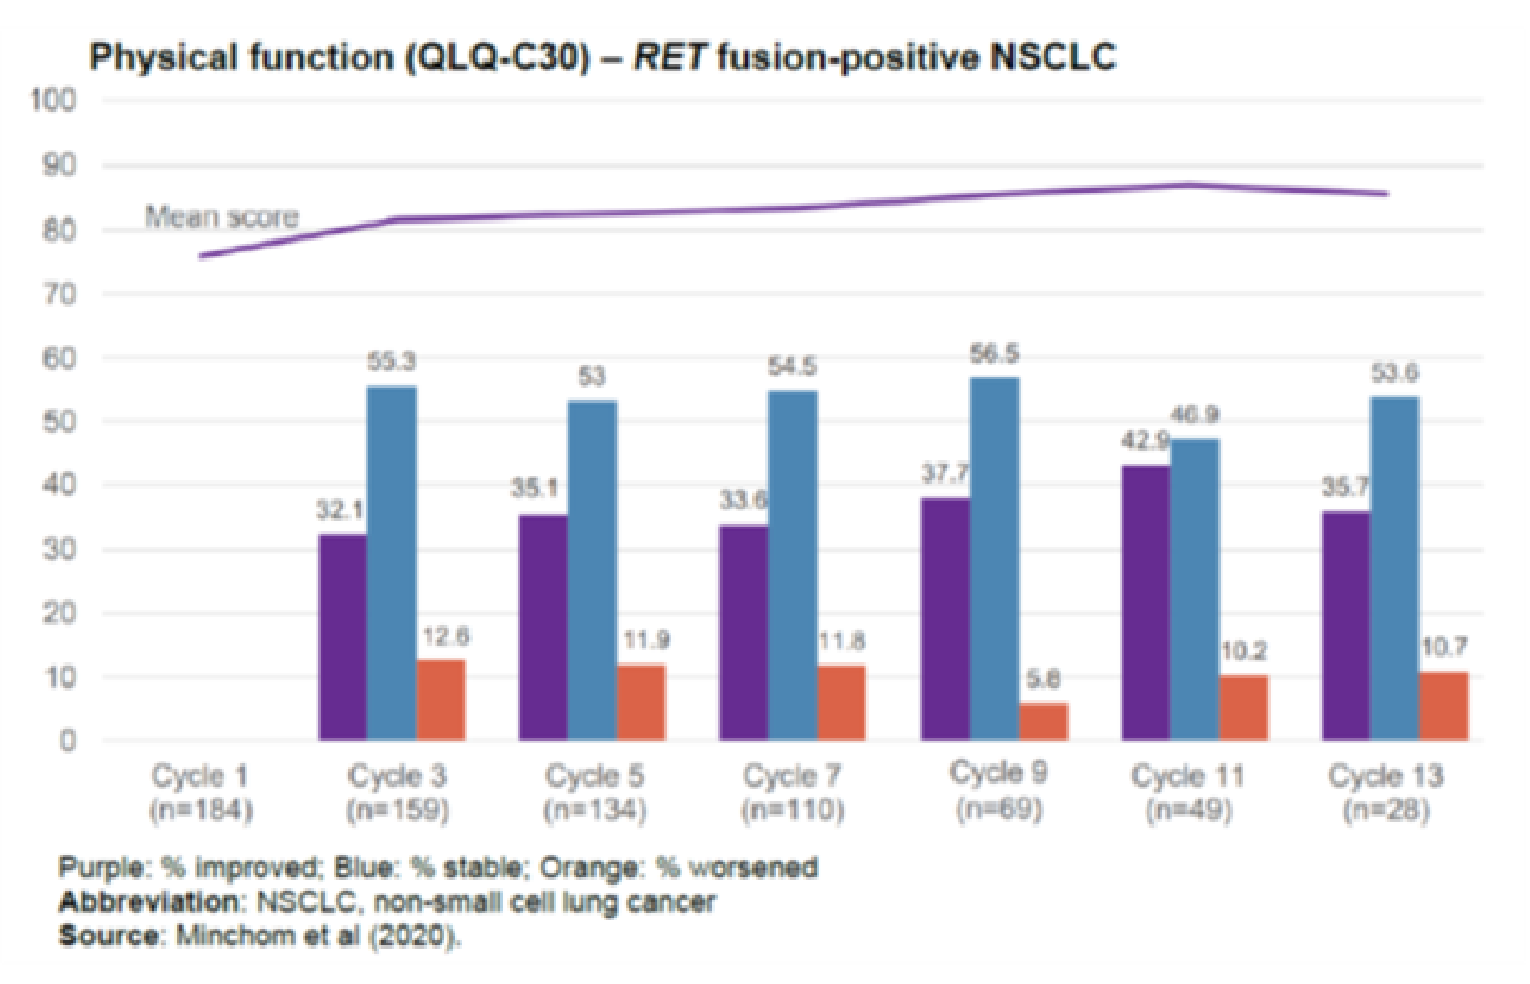 In Figure 6, the physical function scale of the Quality of Life Questionnaire-Core 30 in RET fusion-positive non–small cell lung cancer patients is presented. The mean score line increases from cycle 1 to cycle 3 and remains almost constant from cycle 3 to cycle 13. Histograms are presented at each cycle which represent the percentage of patients that improved, were stable, and worsened during the cycle. The length of the histograms varies for each attribute and at each cycle. No data are presented for cycle 1.